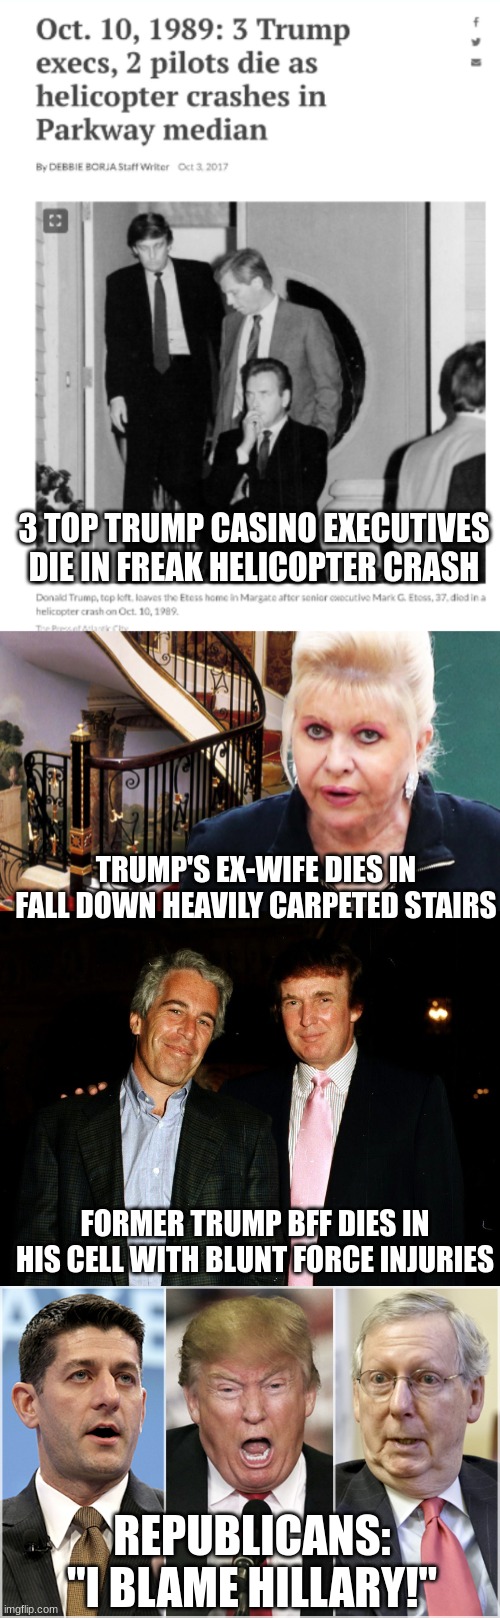 The GOP take enabling to a whole new level | 3 TOP TRUMP CASINO EXECUTIVES DIE IN FREAK HELICOPTER CRASH; TRUMP'S EX-WIFE DIES IN FALL DOWN HEAVILY CARPETED STAIRS; FORMER TRUMP BFF DIES IN HIS CELL WITH BLUNT FORCE INJURIES; REPUBLICANS: "I BLAME HILLARY!" | image tagged in trump epstein,republicans1234 | made w/ Imgflip meme maker